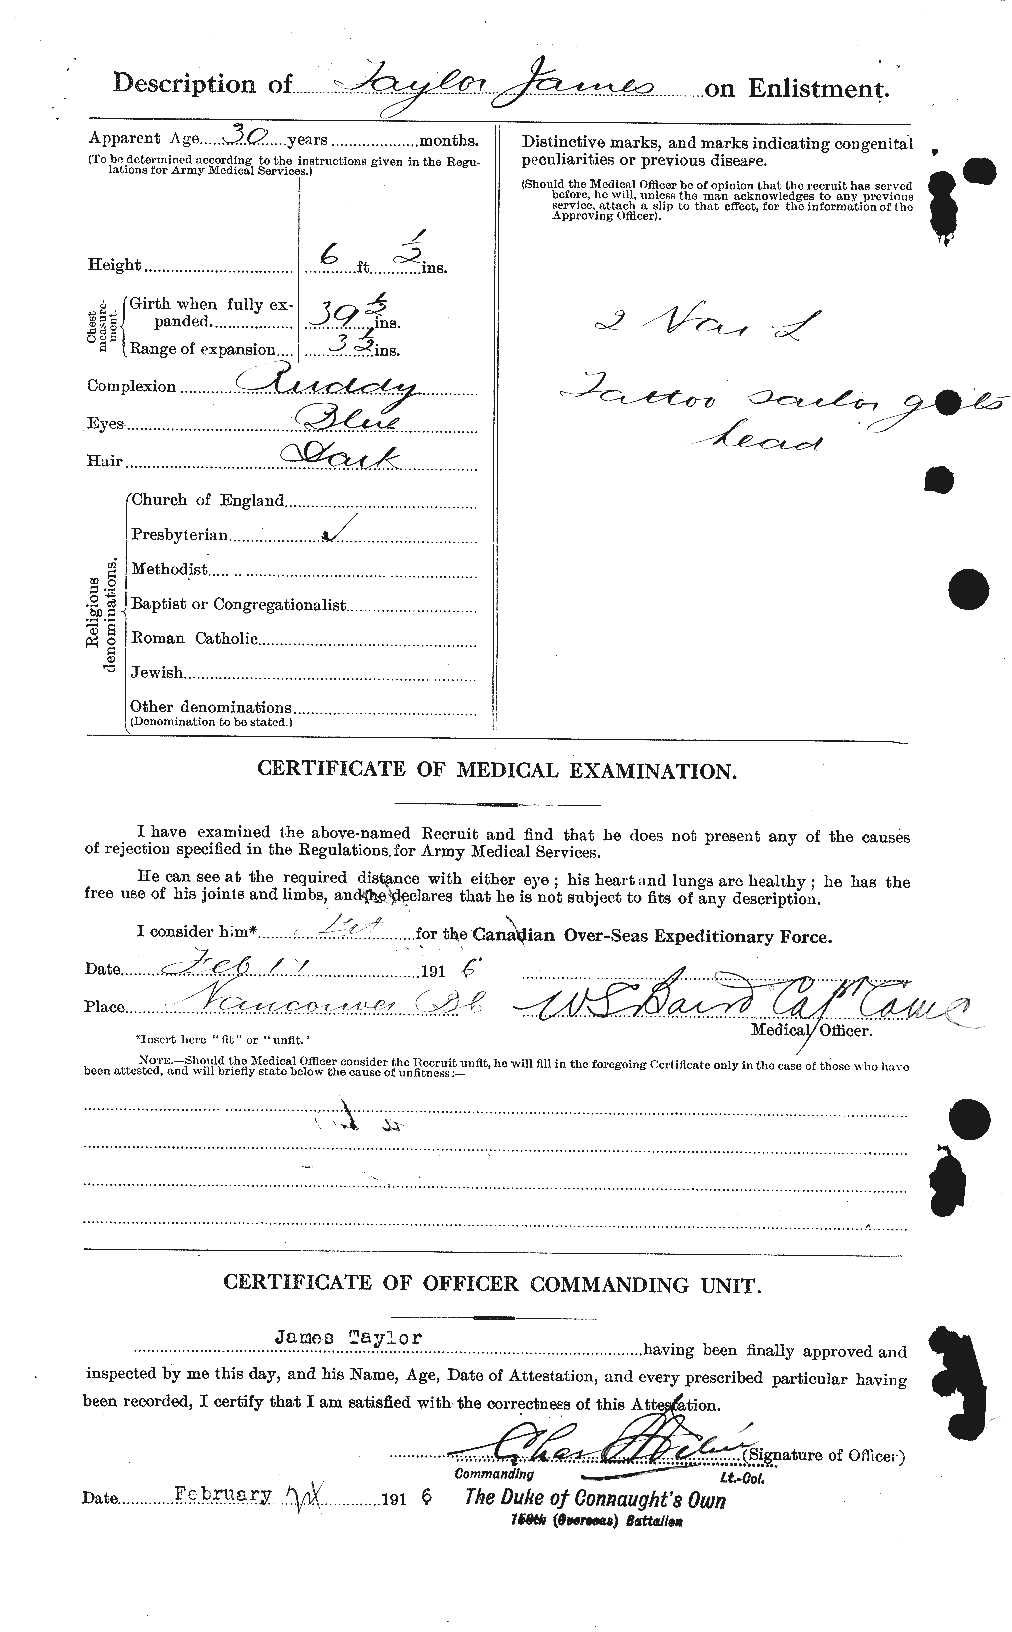 Personnel Records of the First World War - CEF 626694b